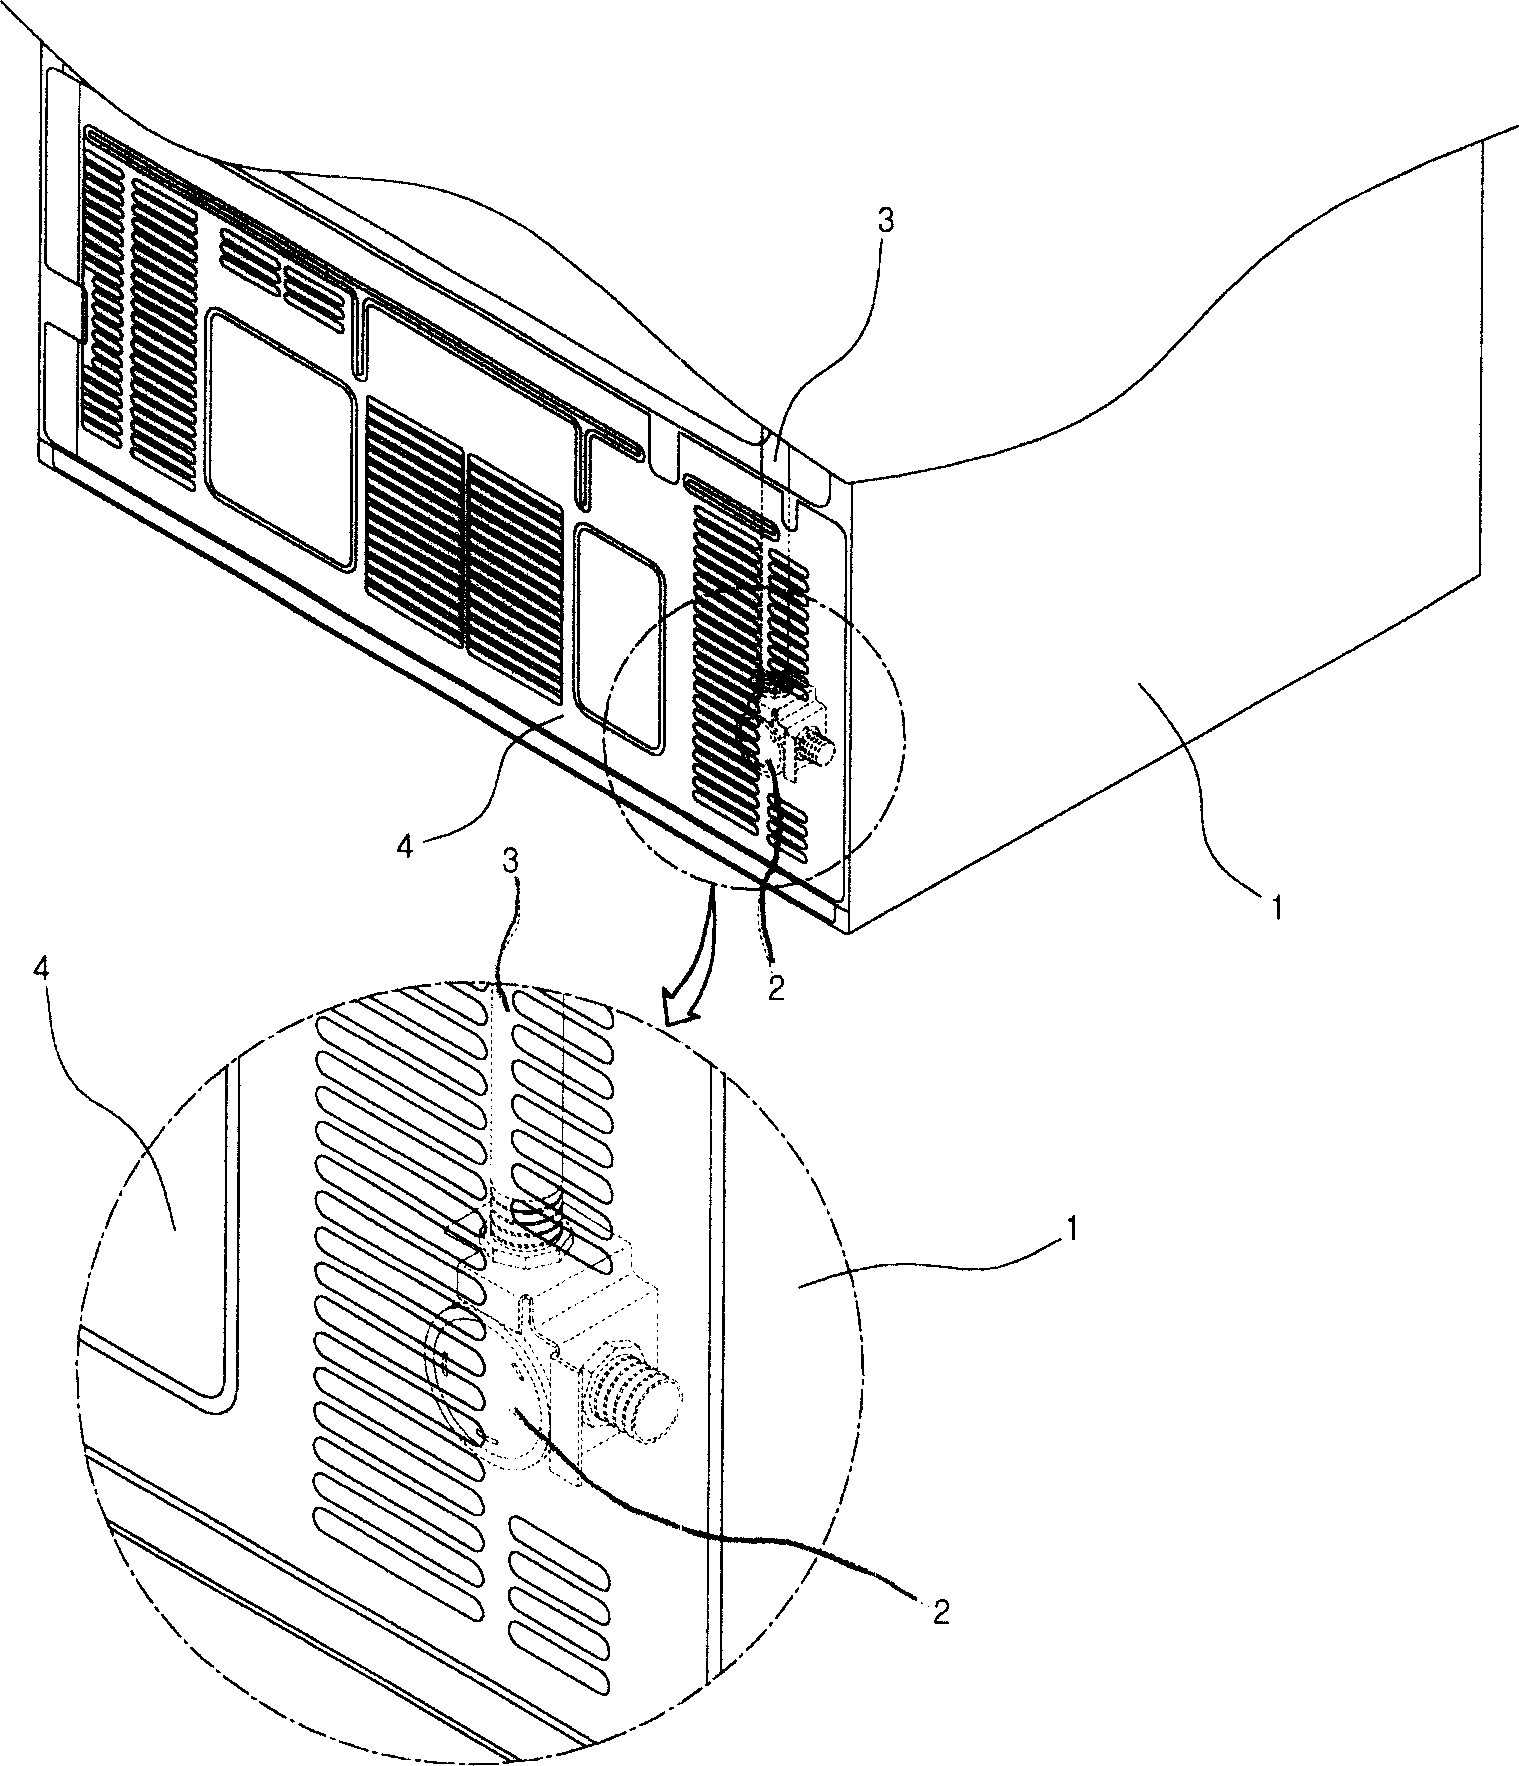 Mechanical cavity cover structure for refrigerator